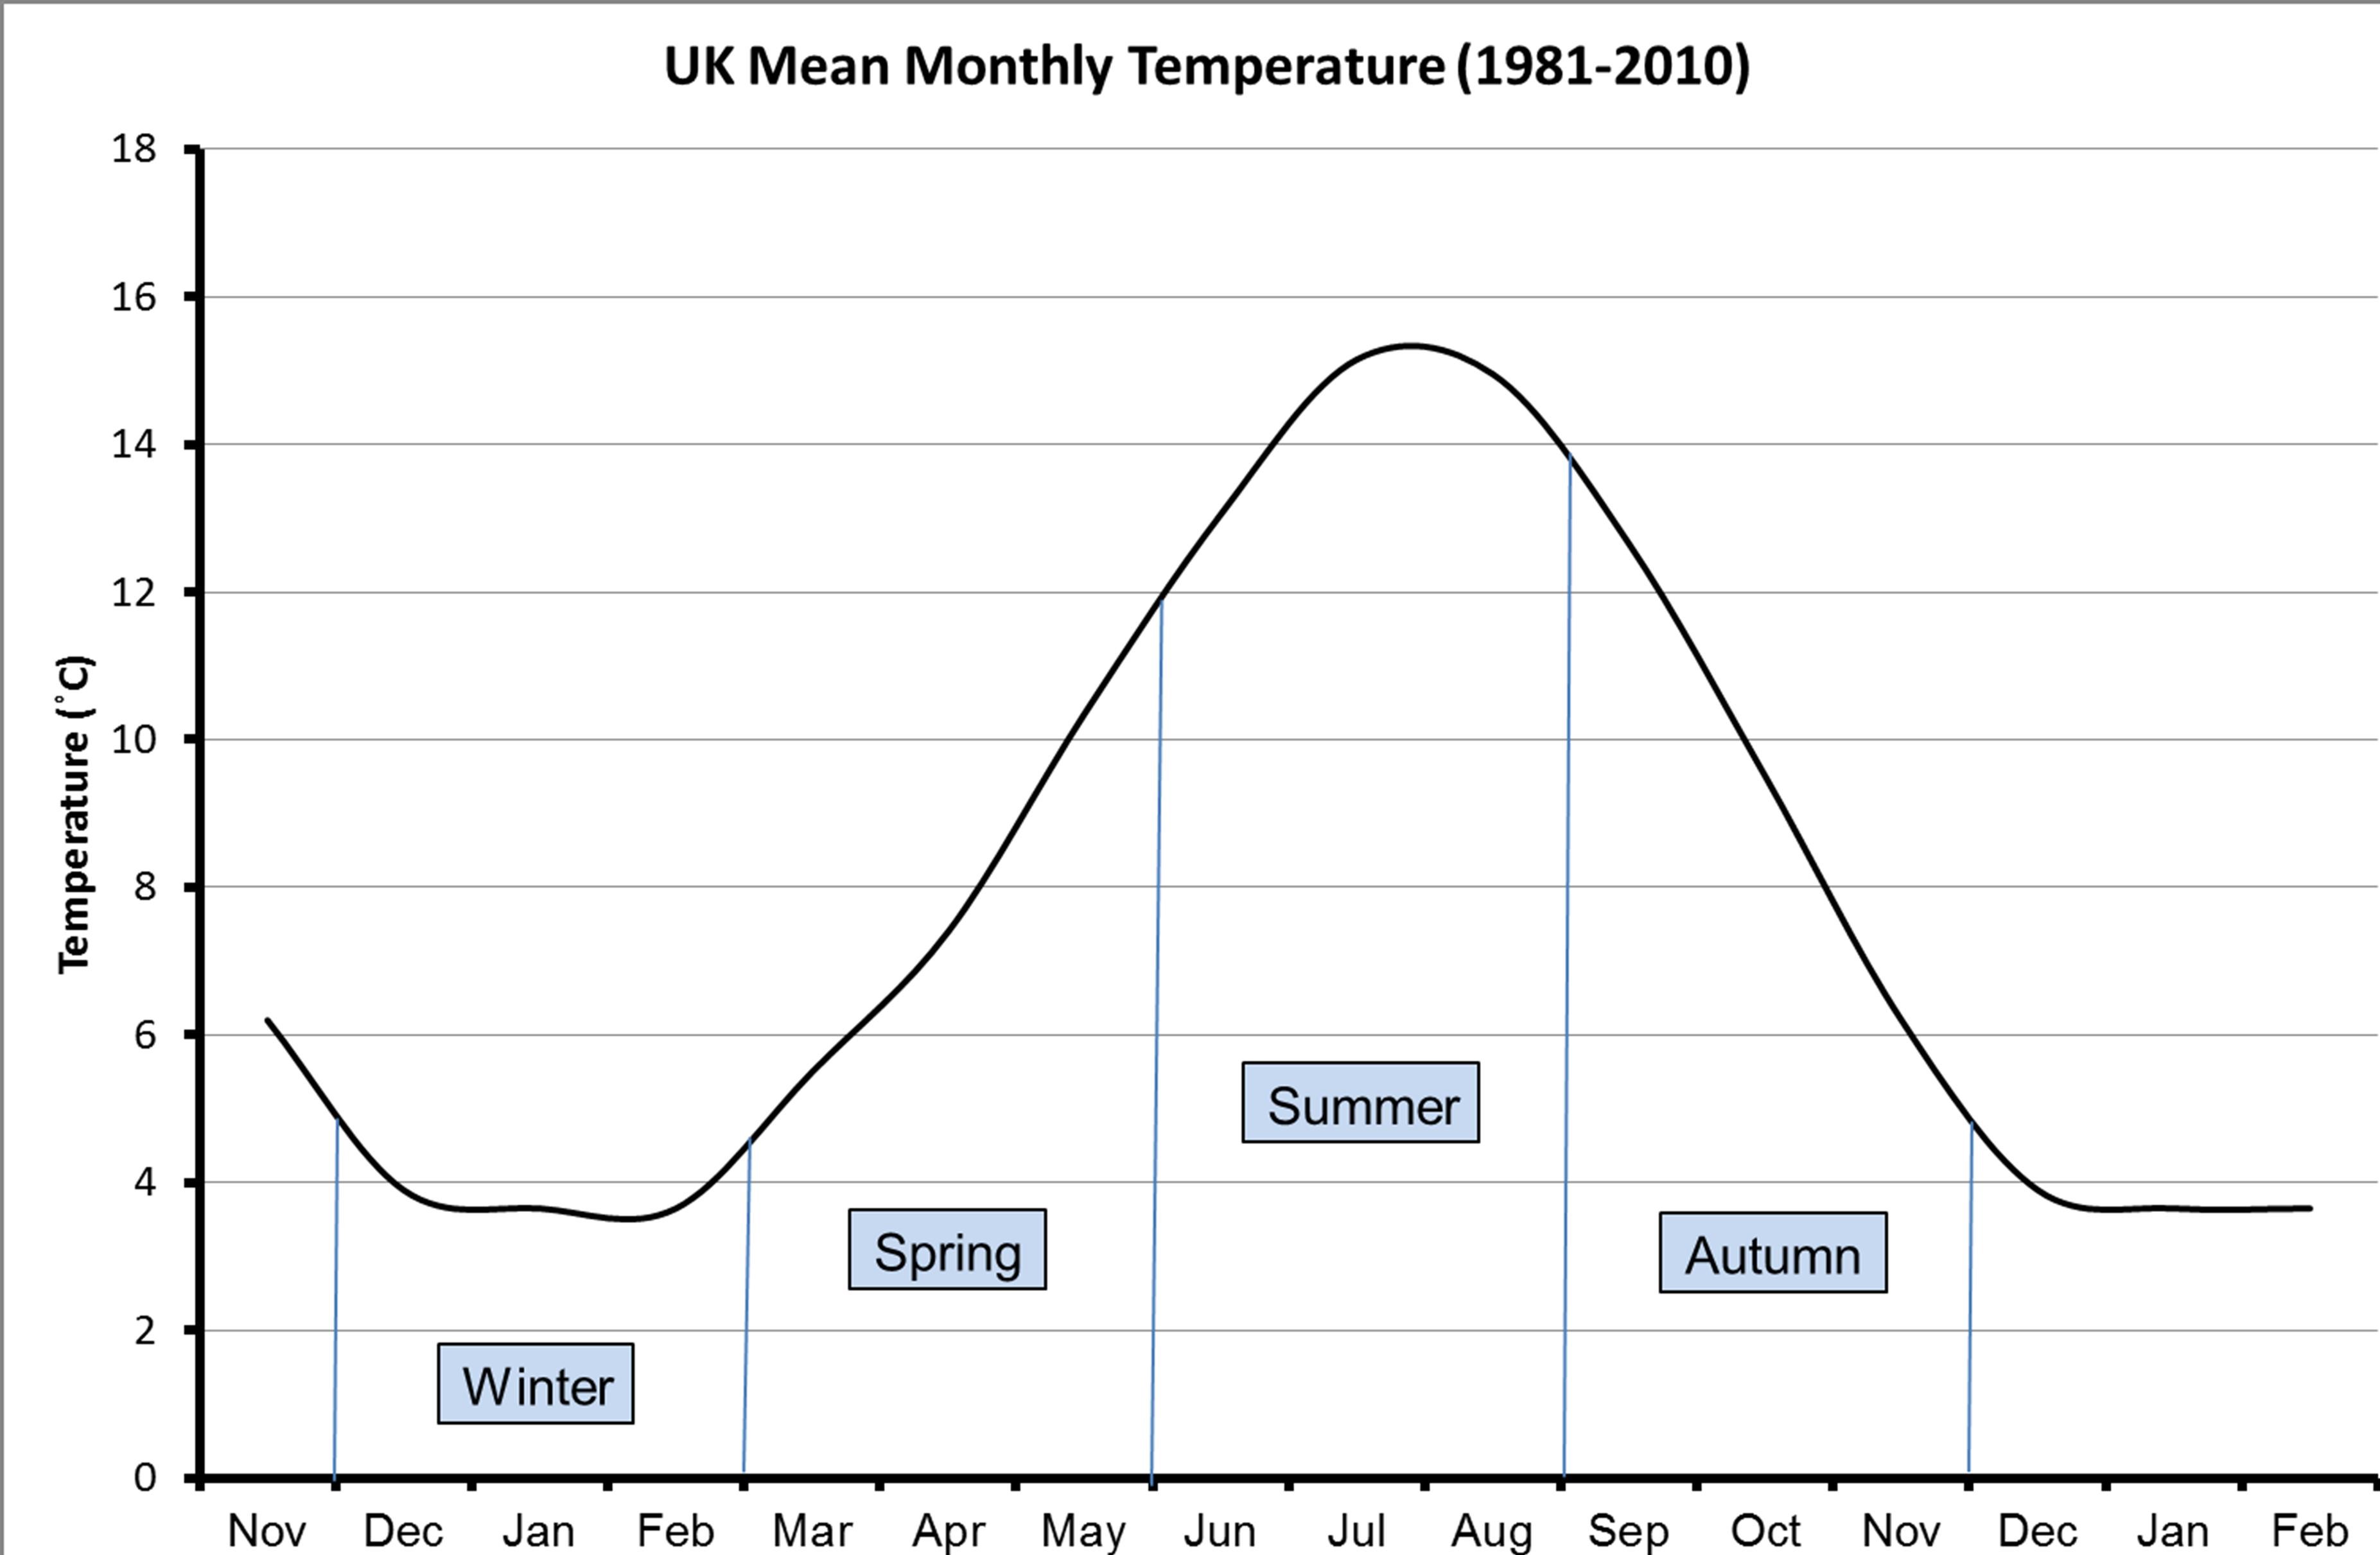 Mean monthly temperatures